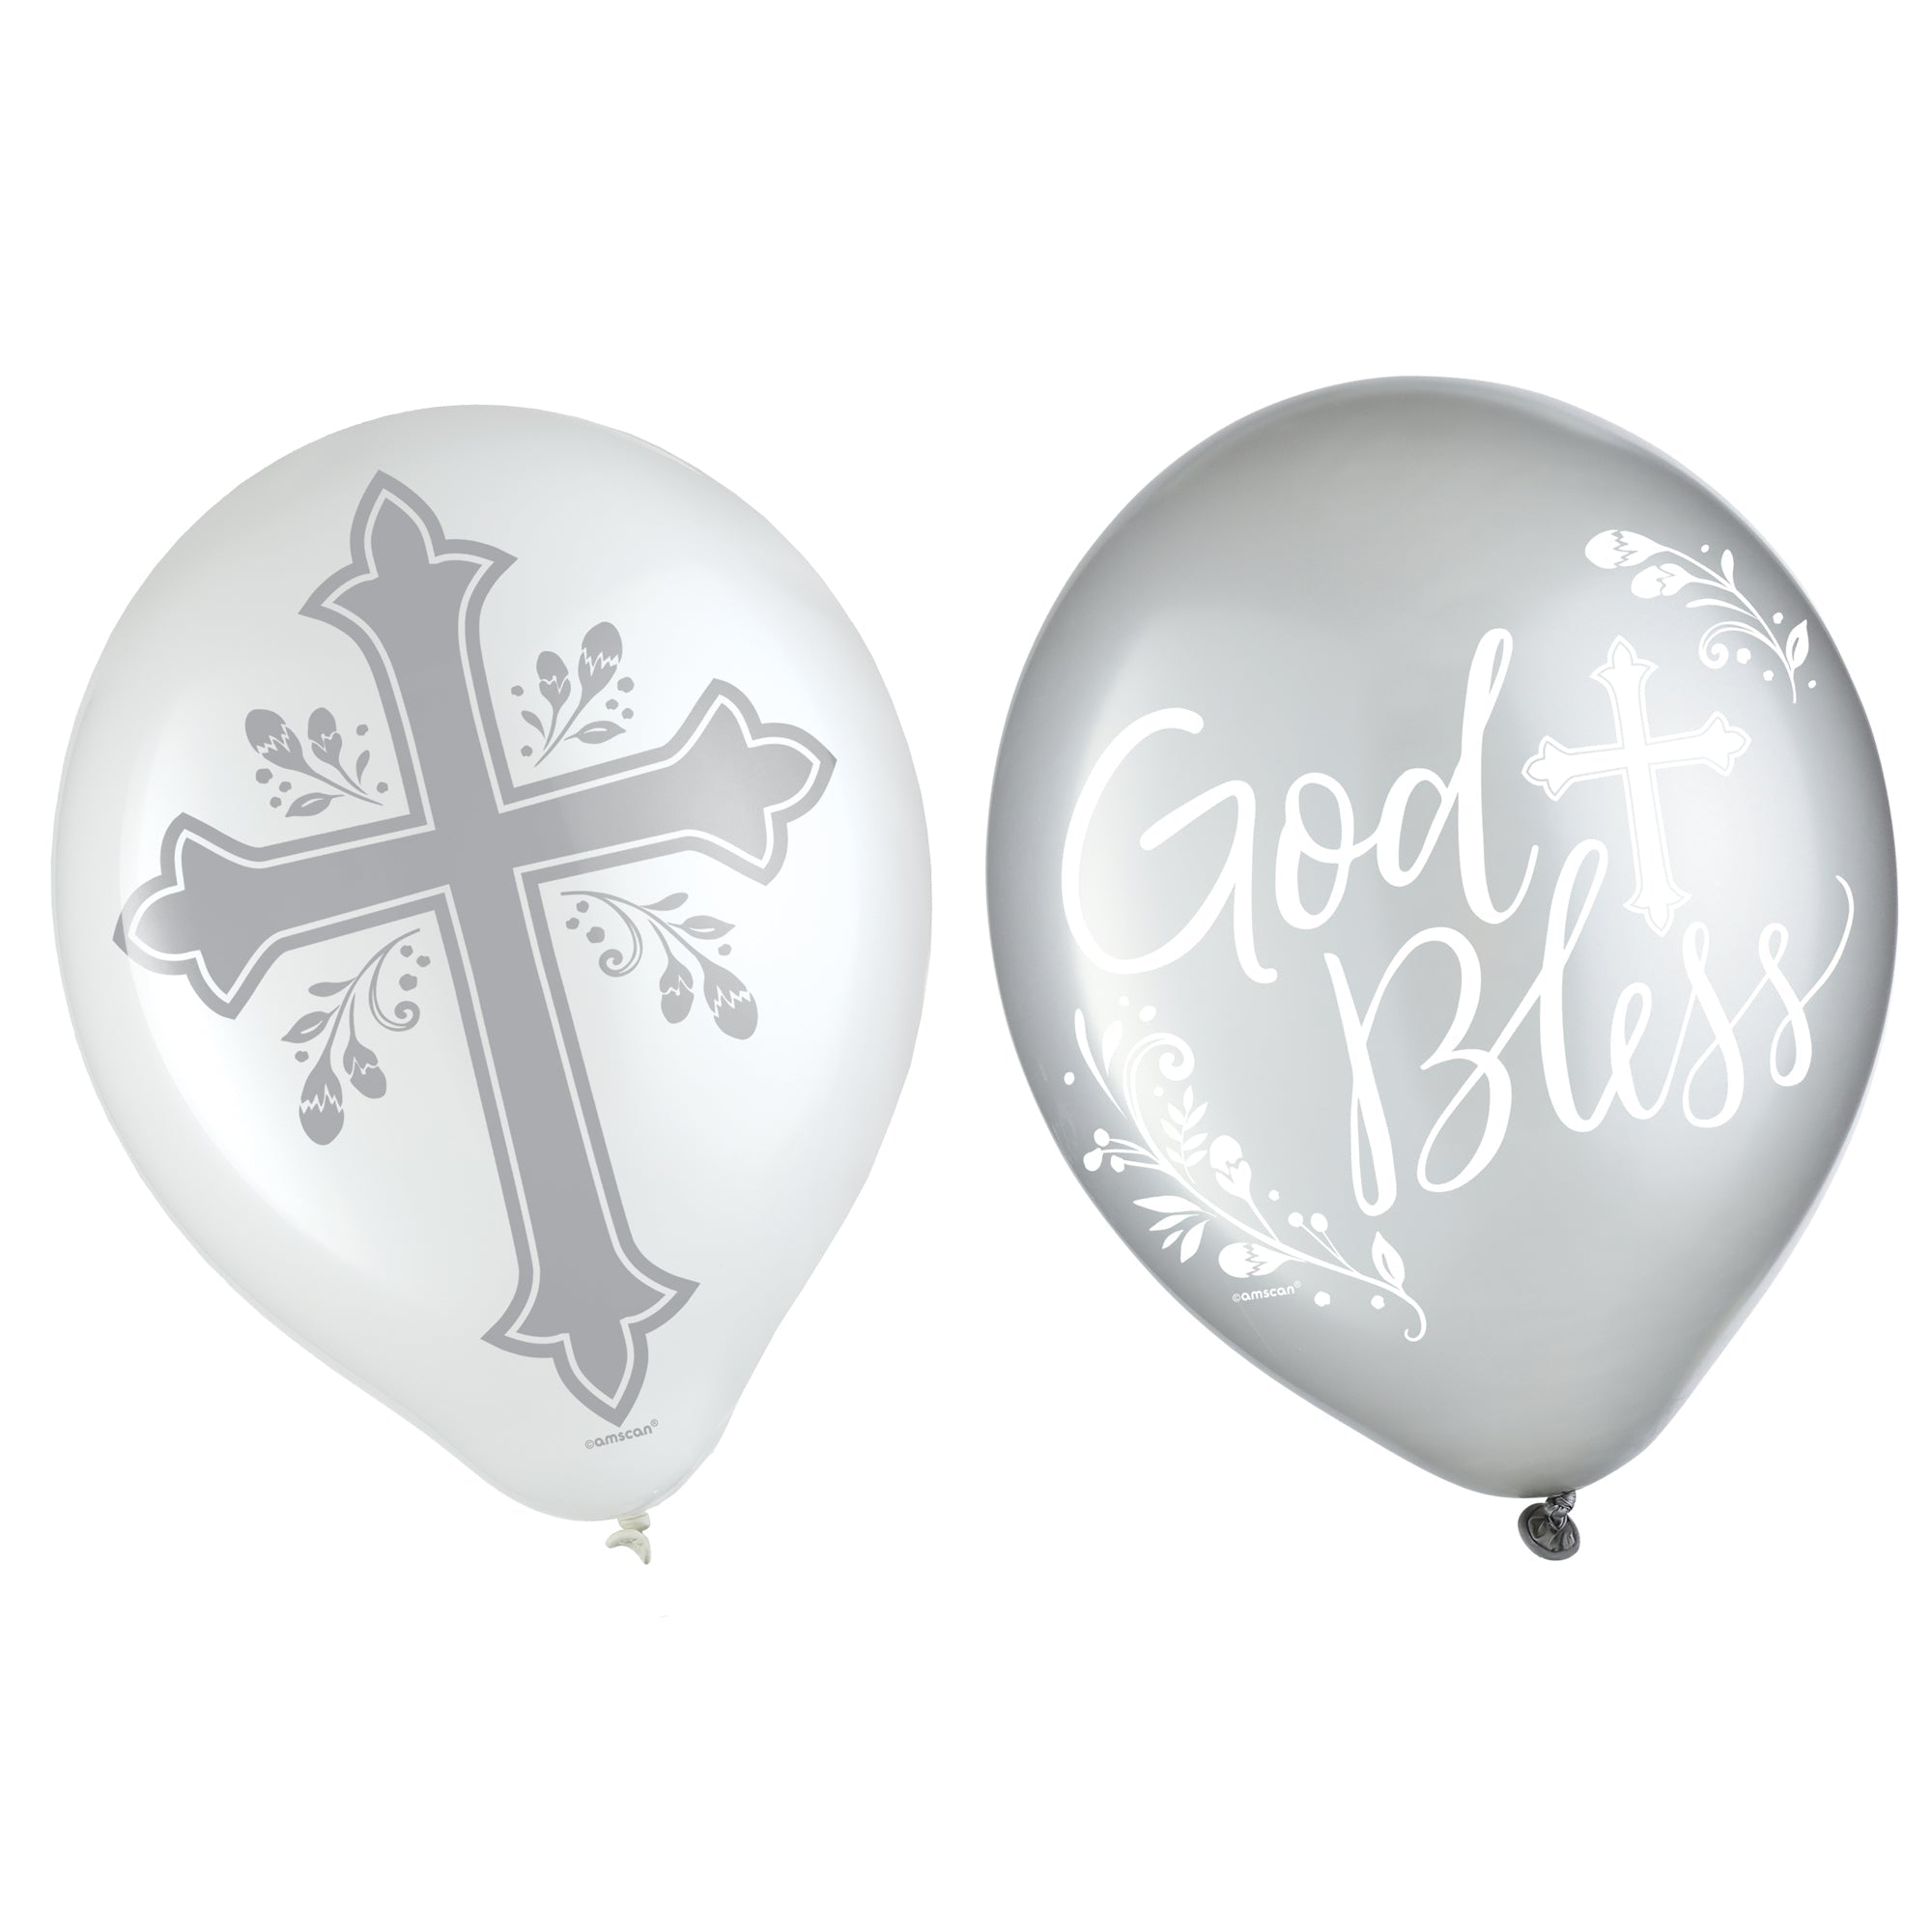 15 Holy Day Printed Latex Balloons  Asst. Colors  12in